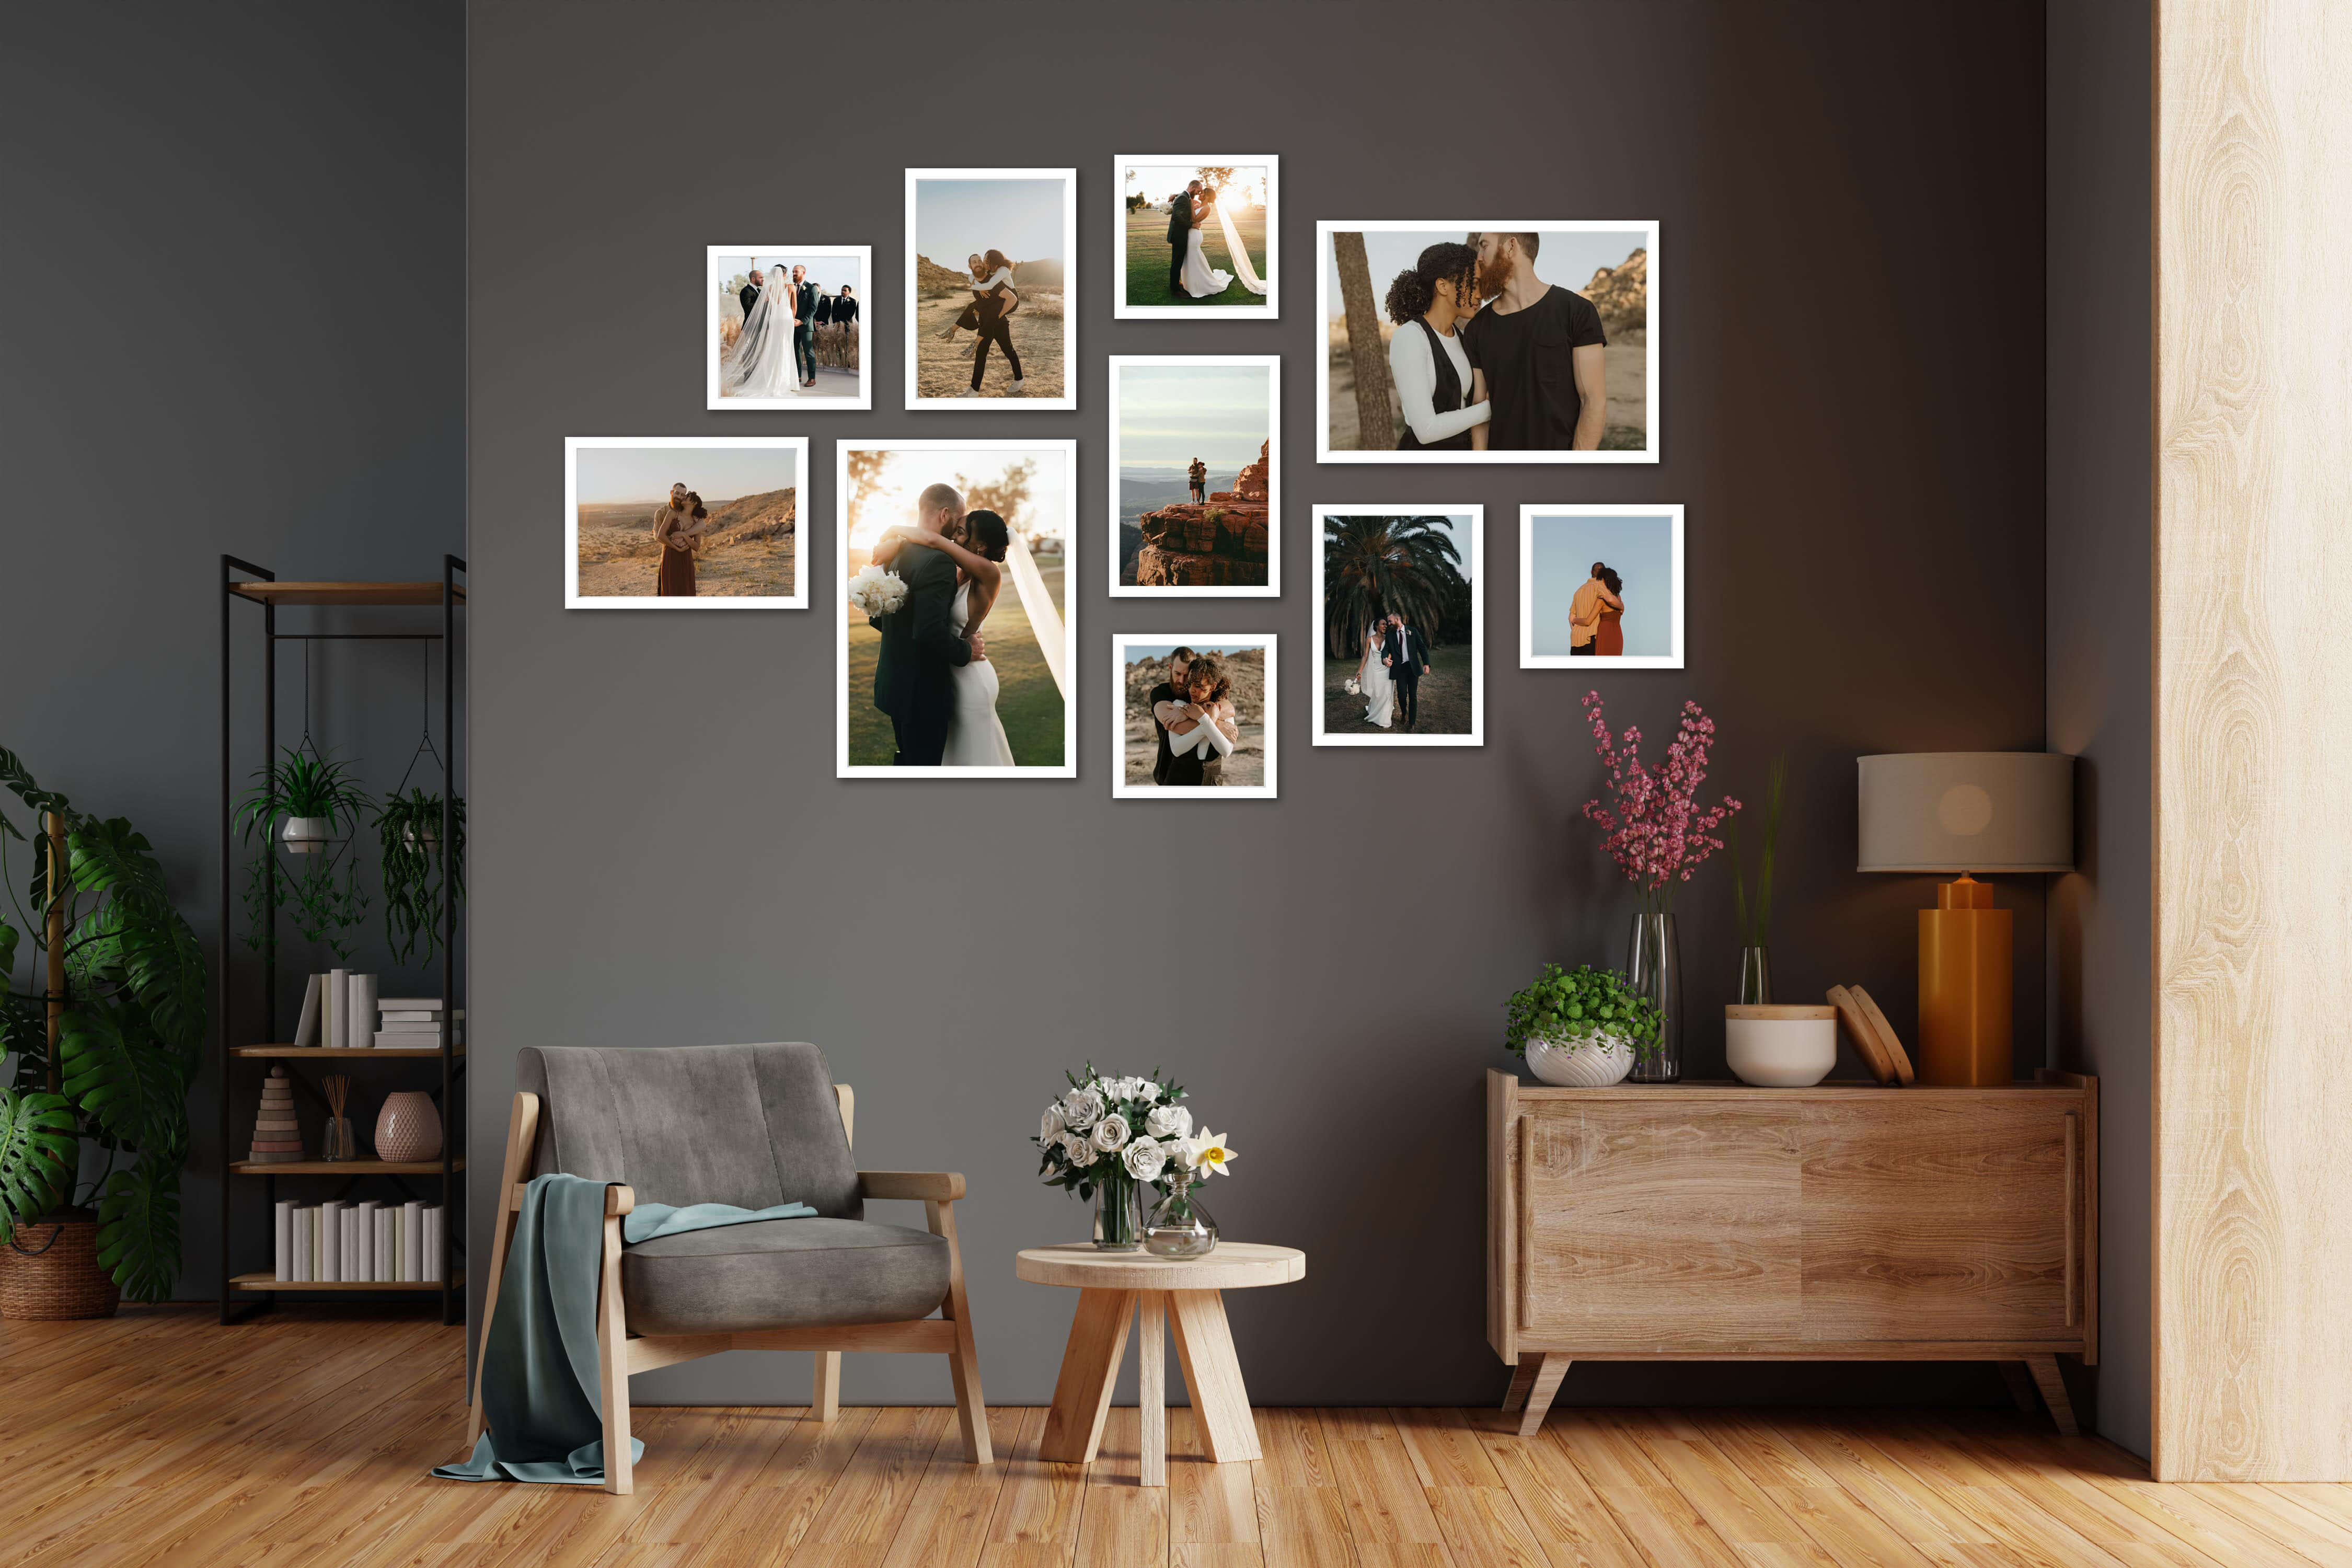 Frame gallery wall set for a gift for hard to buy for man